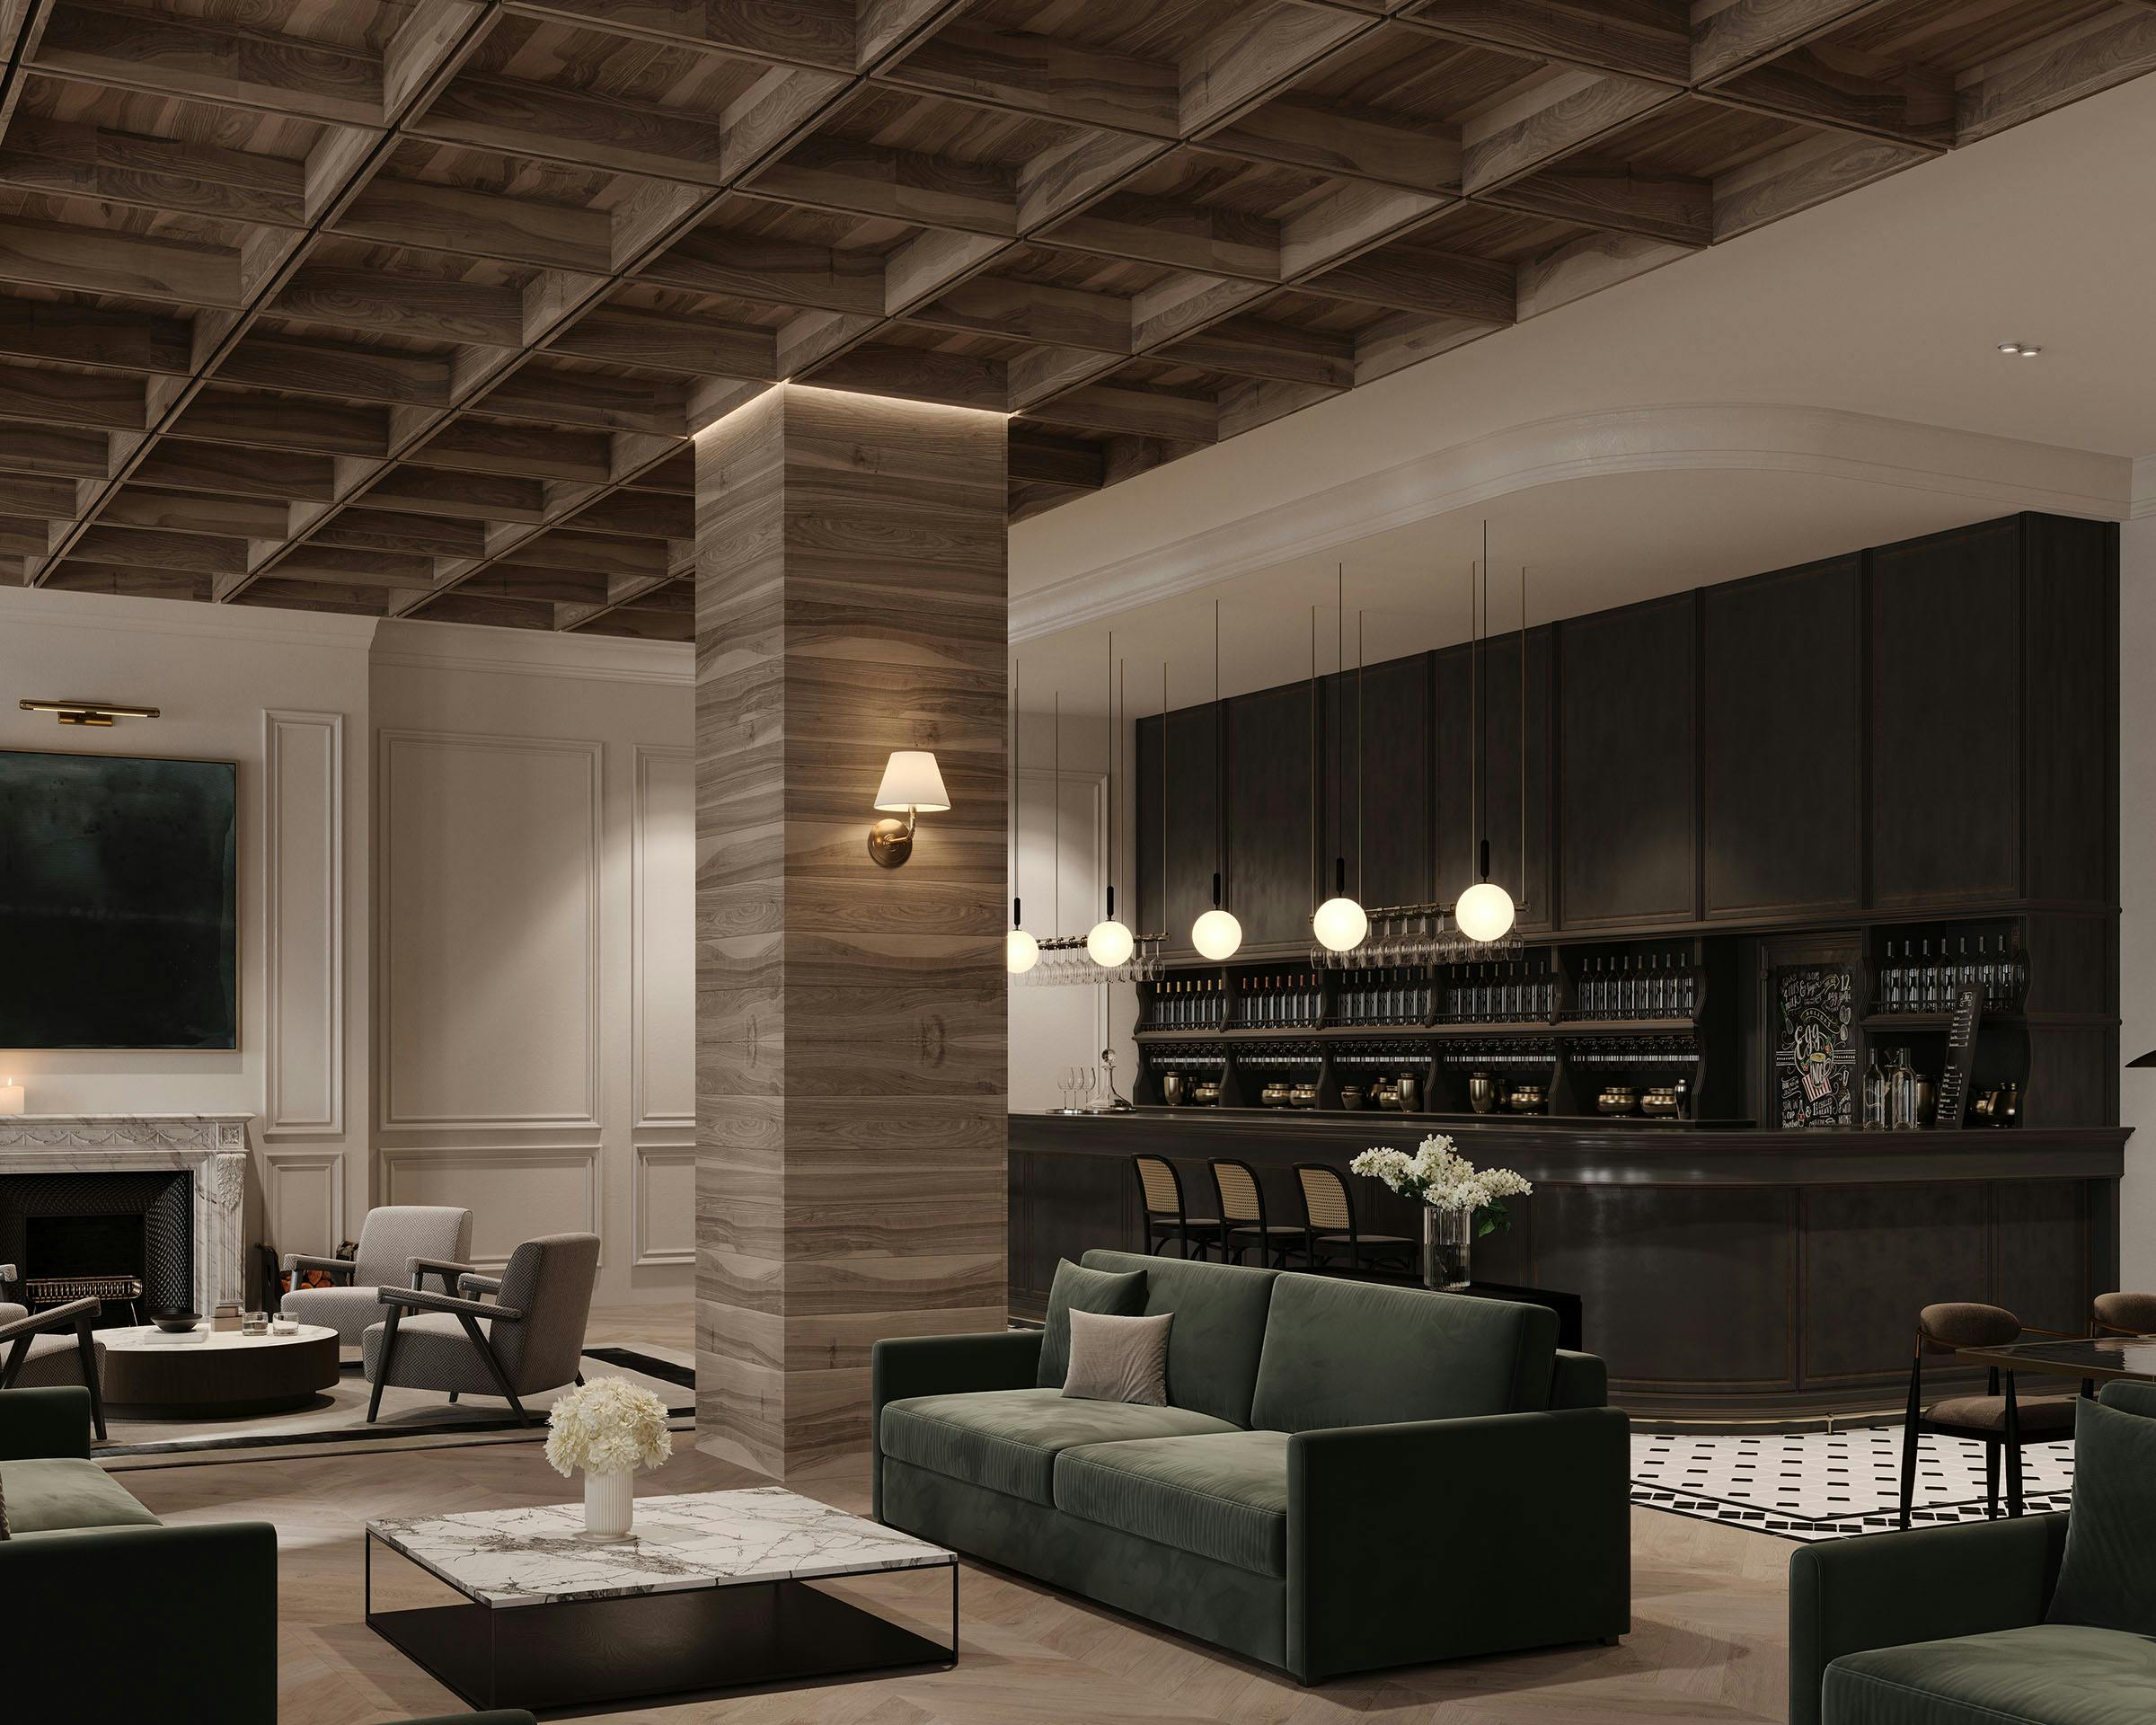 Elegant hotel lobby featuring dark wood accents, a plush green sofa, marble columns, and a sophisticated bar area with stools under soft acoustic grid ceiling. A cozy seating area with a fireplace adds warmth to the room.